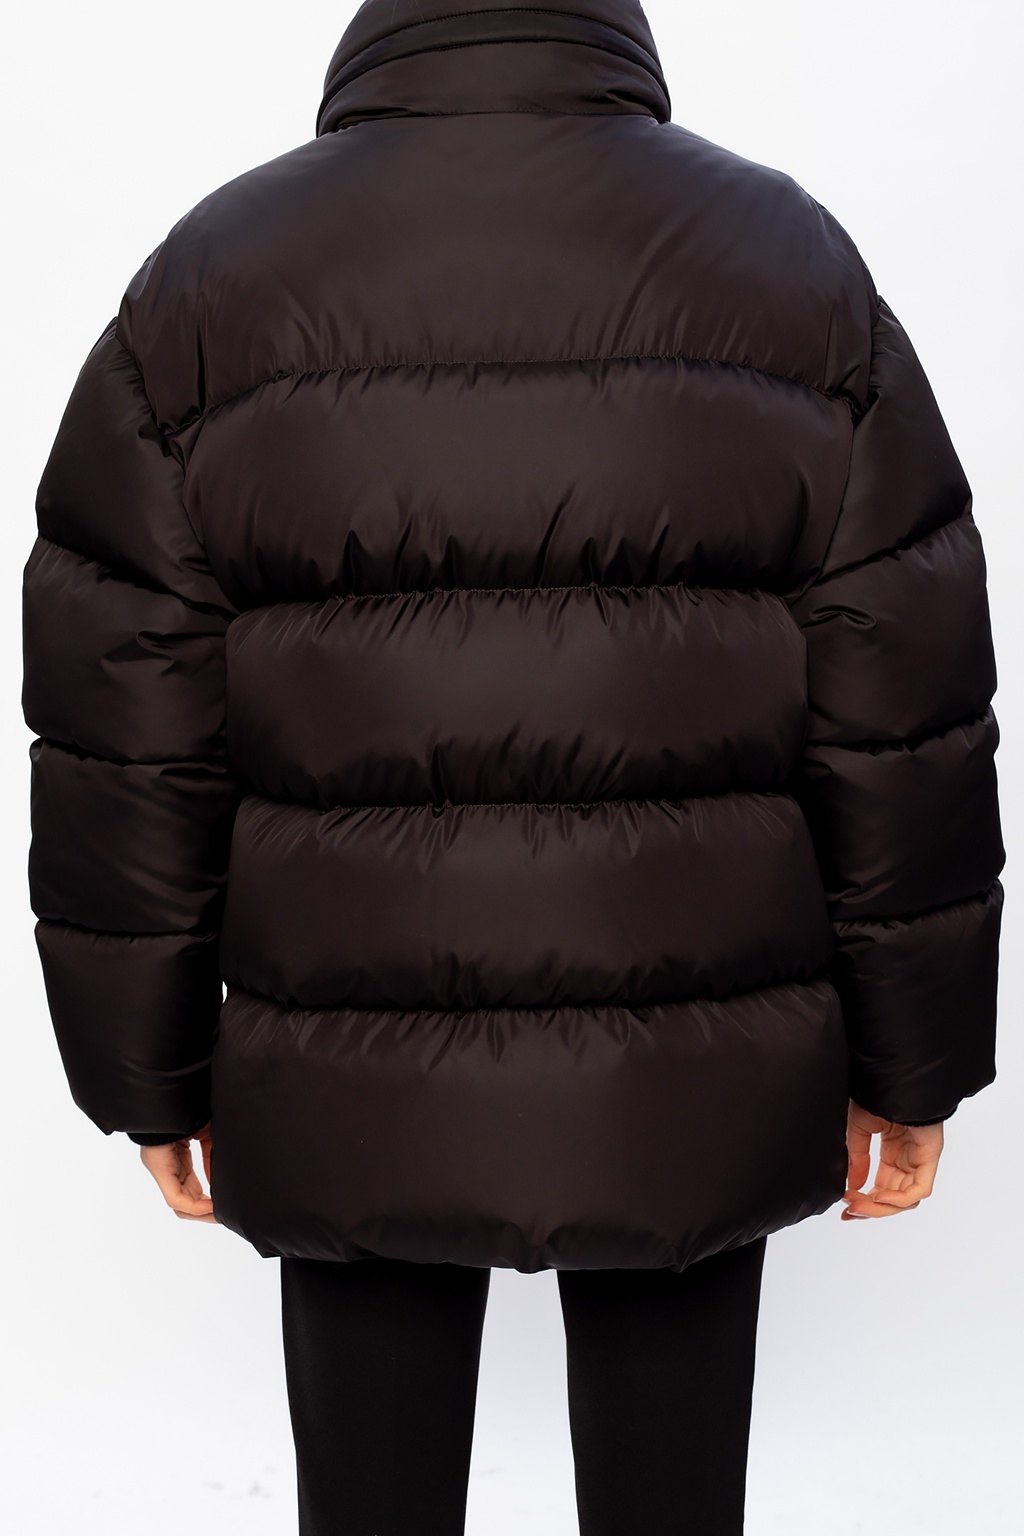 Dsquared2 Quilted down jacket